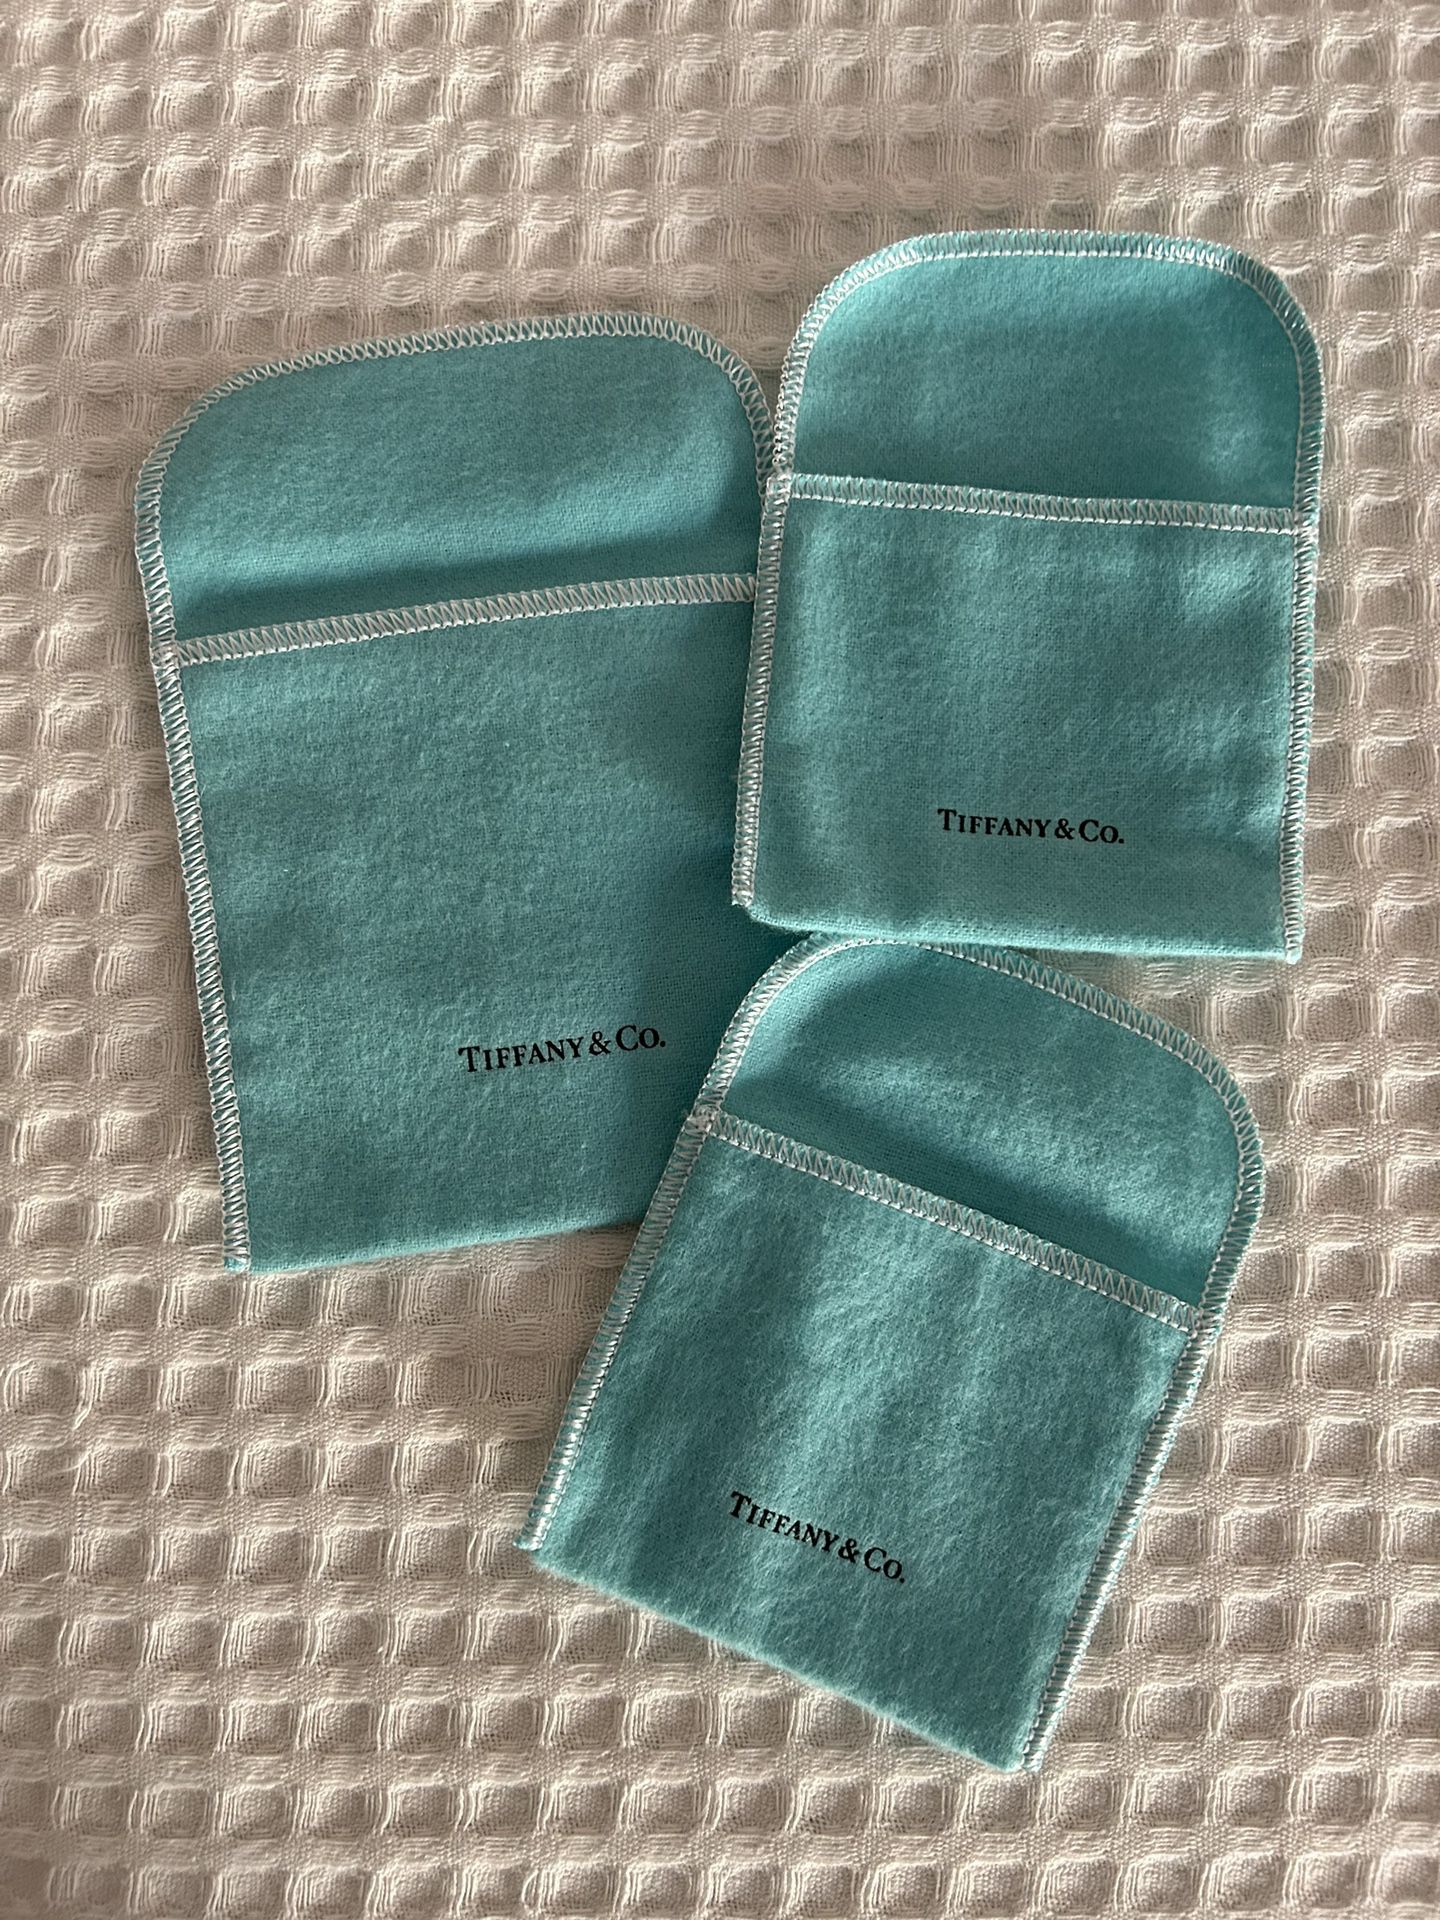 Tiffany & Co. Jewelry Holders (3-total)